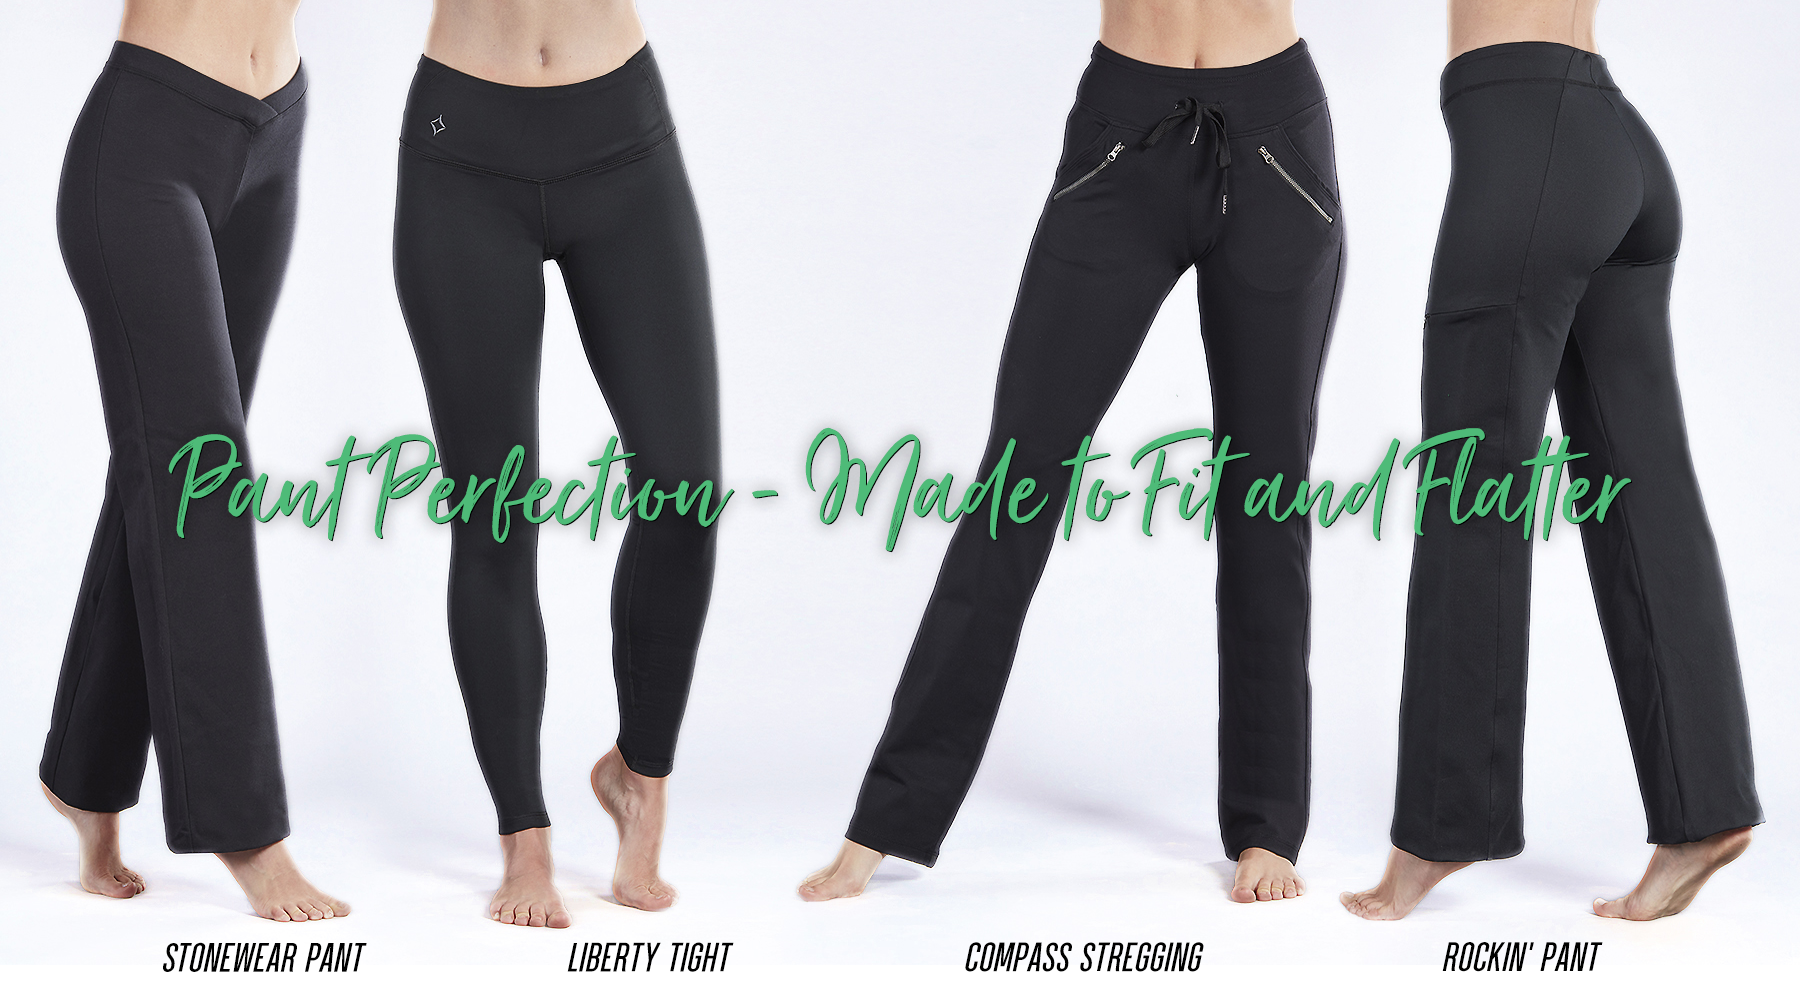 https://cdn.shopify.com/s/files/1/0003/6785/3626/files/Stonewear_Pants_Banner_Pant_Perfection_Green_Type_White_Bkgd_wStyle_Names.png?v=1603302651